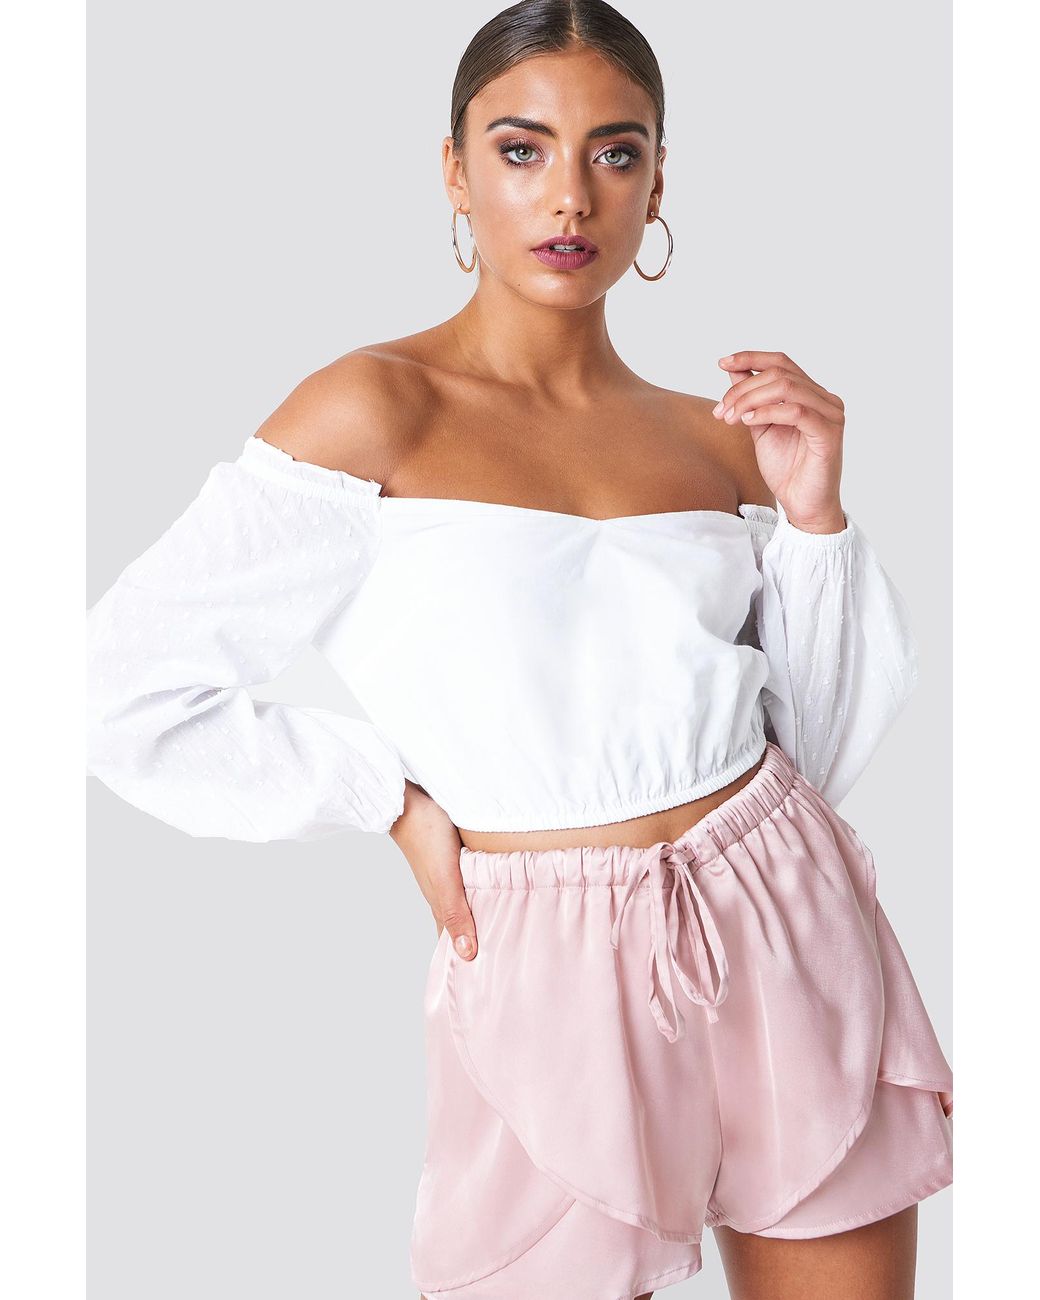 Gather Balloon Off Shoulder Tops